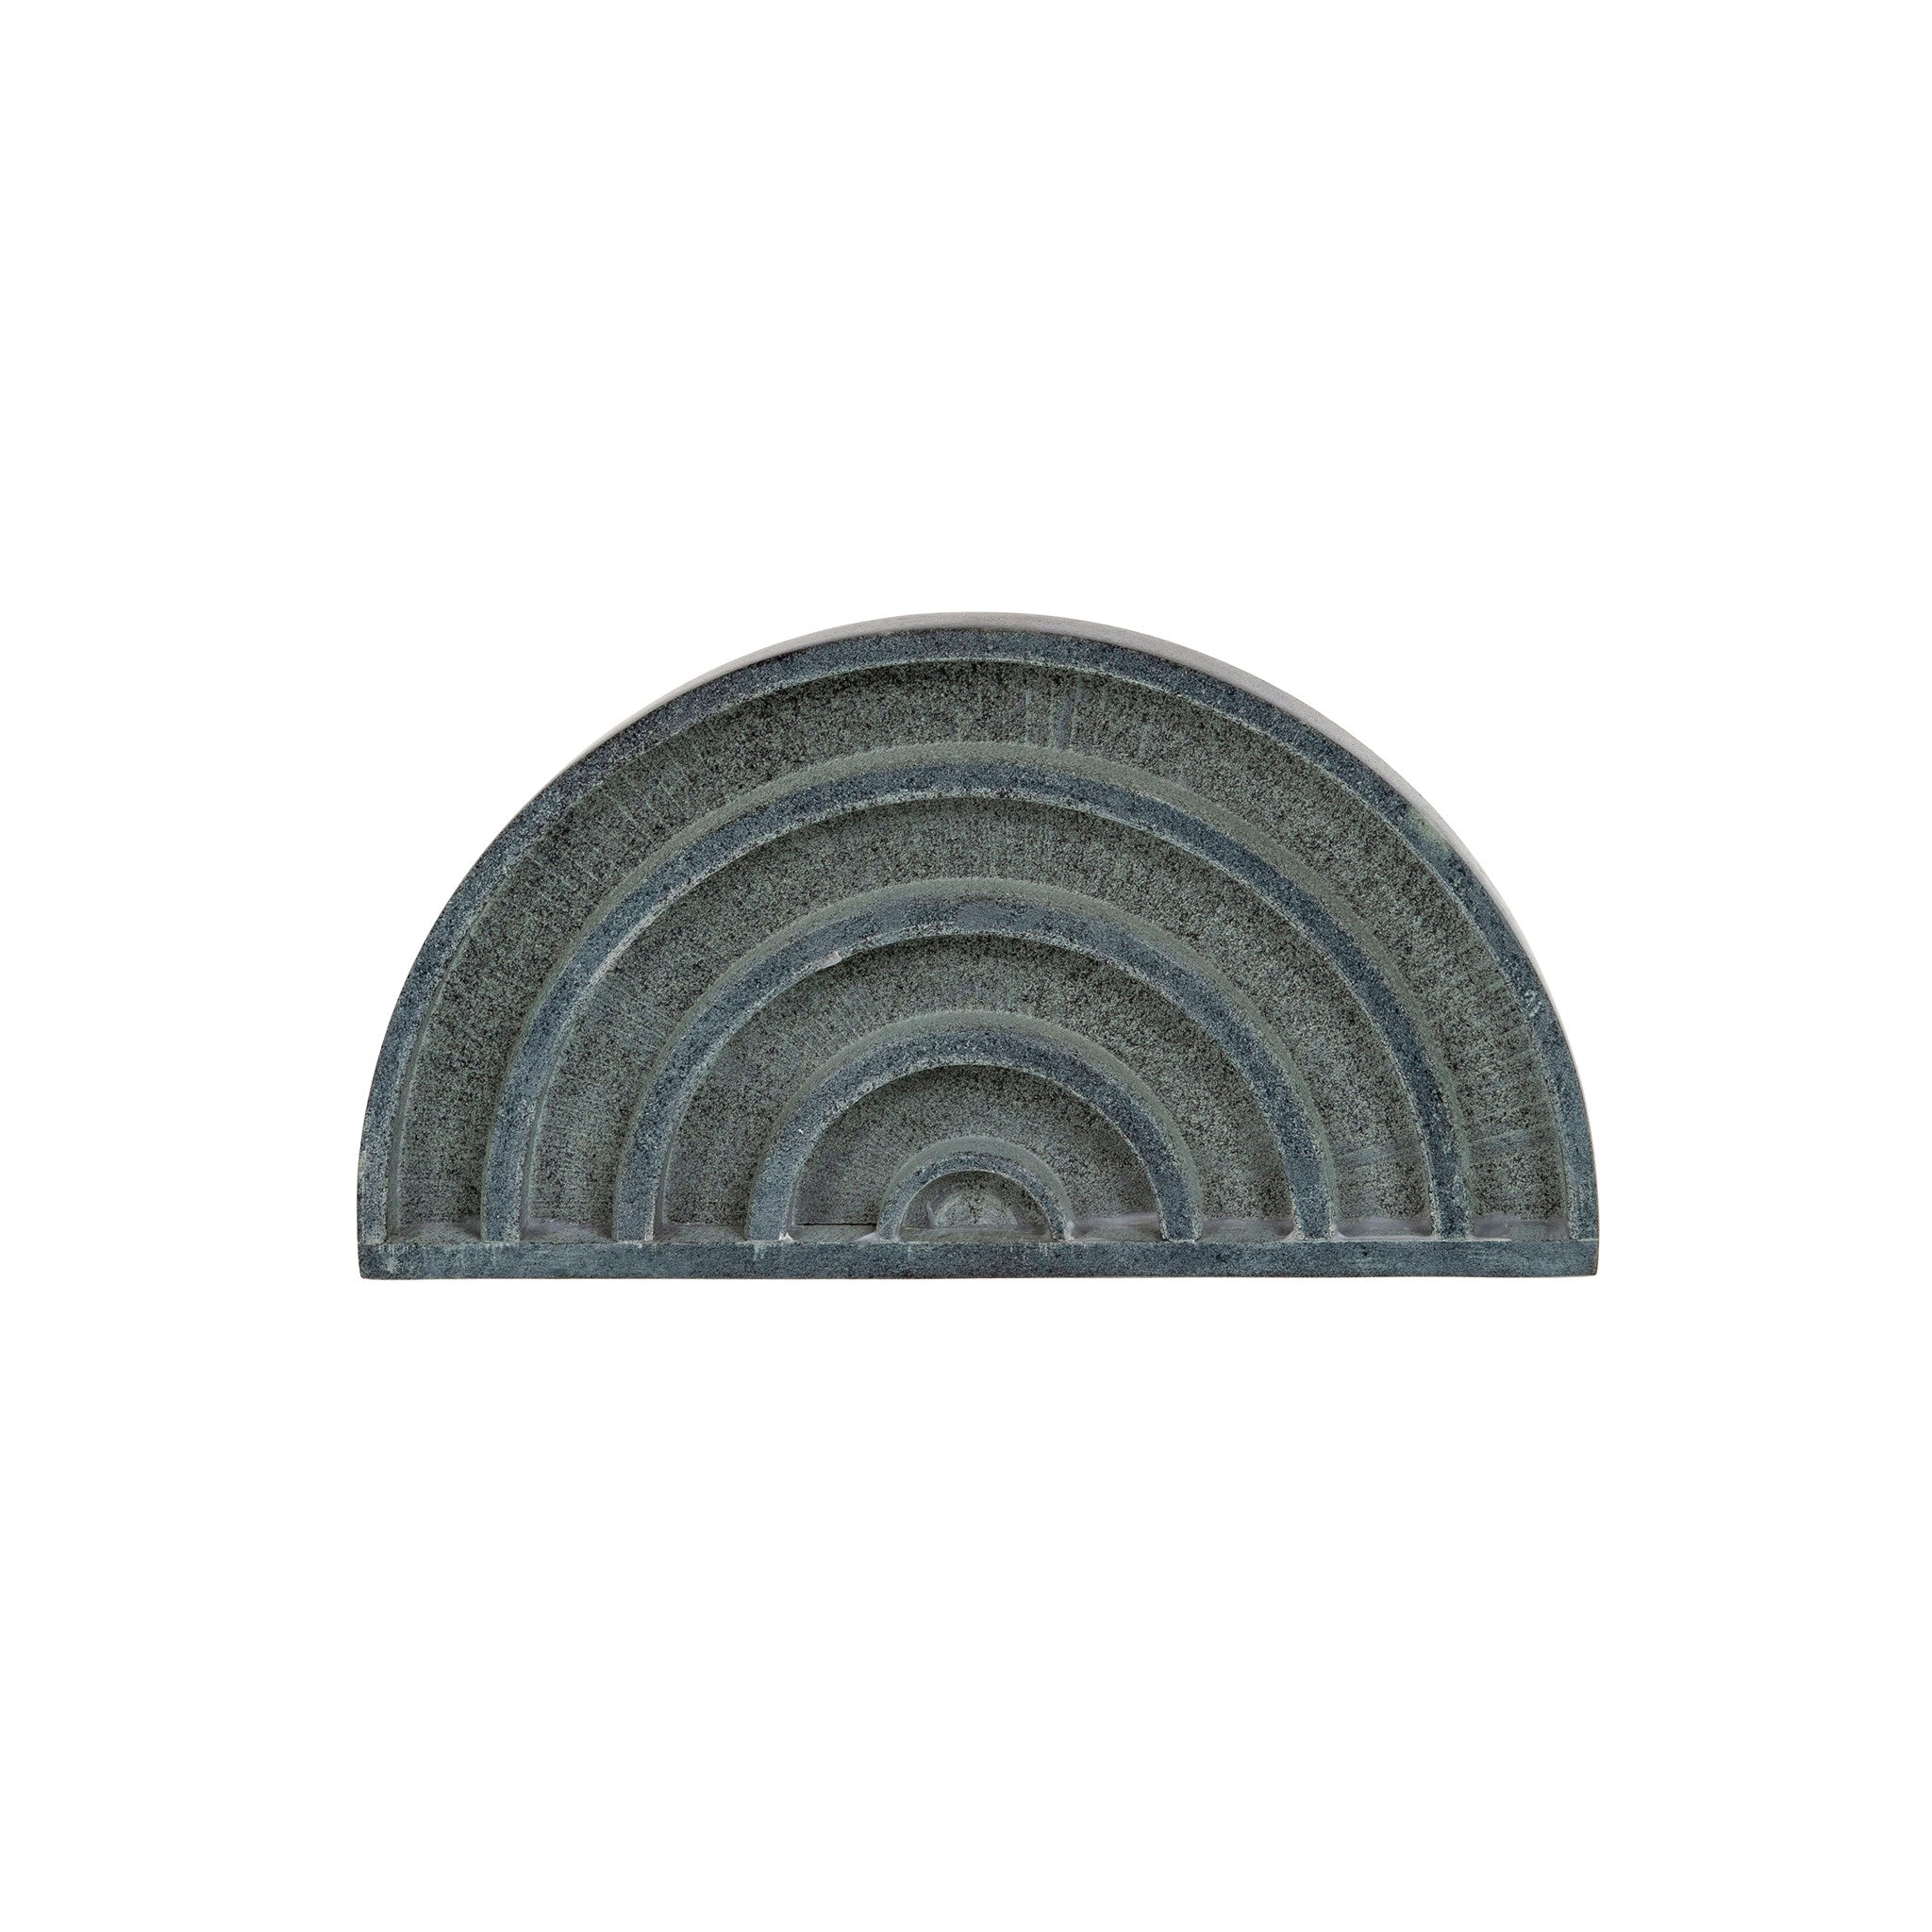 Arches Soapstone Decorative Objects- 3 Colors